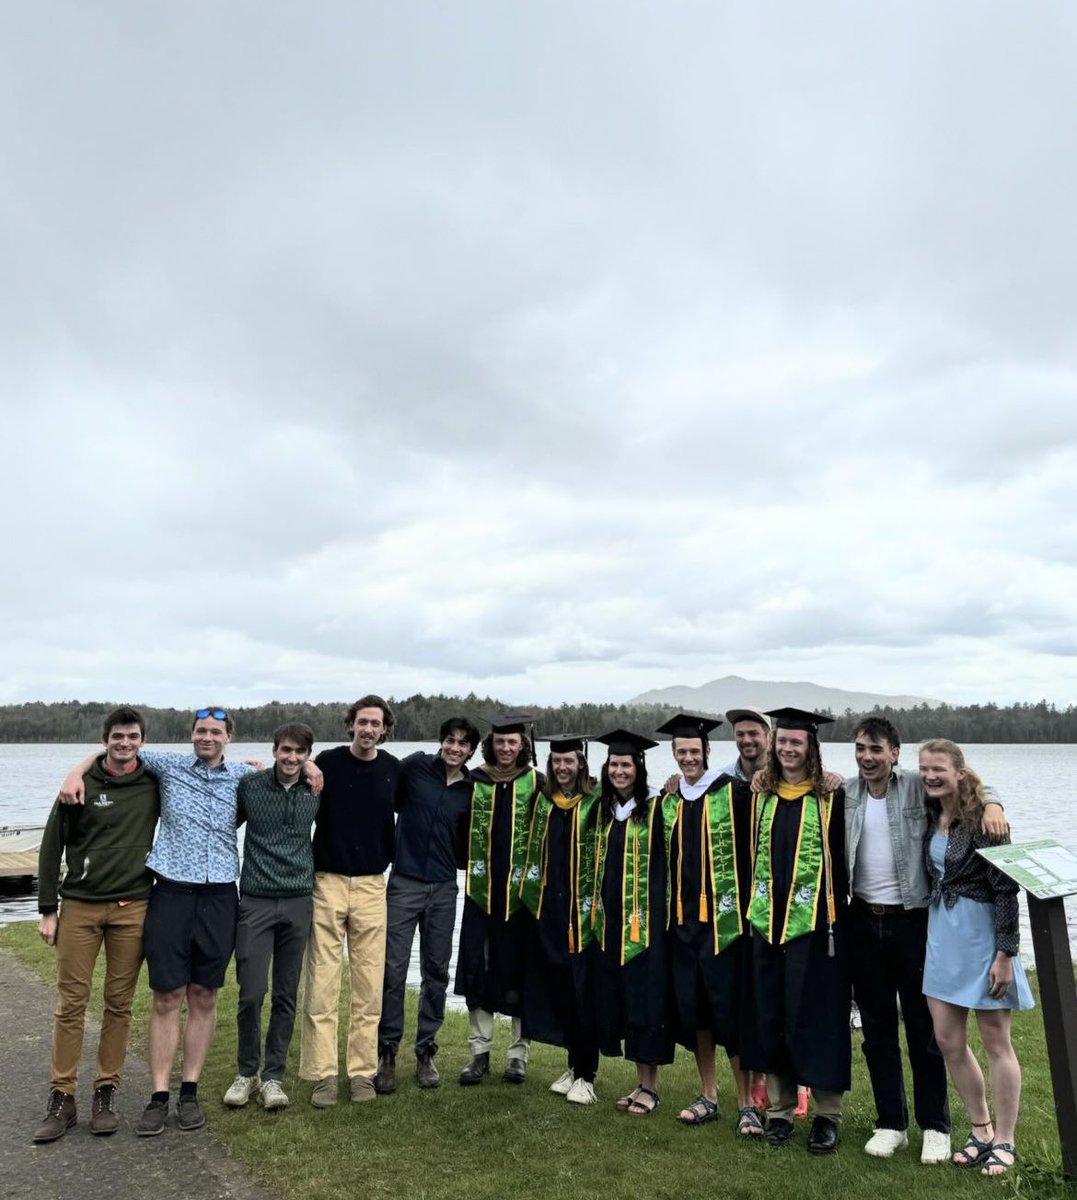 conGRADulations 🎓 Dolcie Tanguay, Aidan Ripp & Brady Miller graduated from Paul Smith’s College on Saturday & Grace Castonguay from Saint Michael’s College (virtually from Bend) on Sunday! Bjorn Westervelt will walk in his graduation from UVM this weekend ‼️